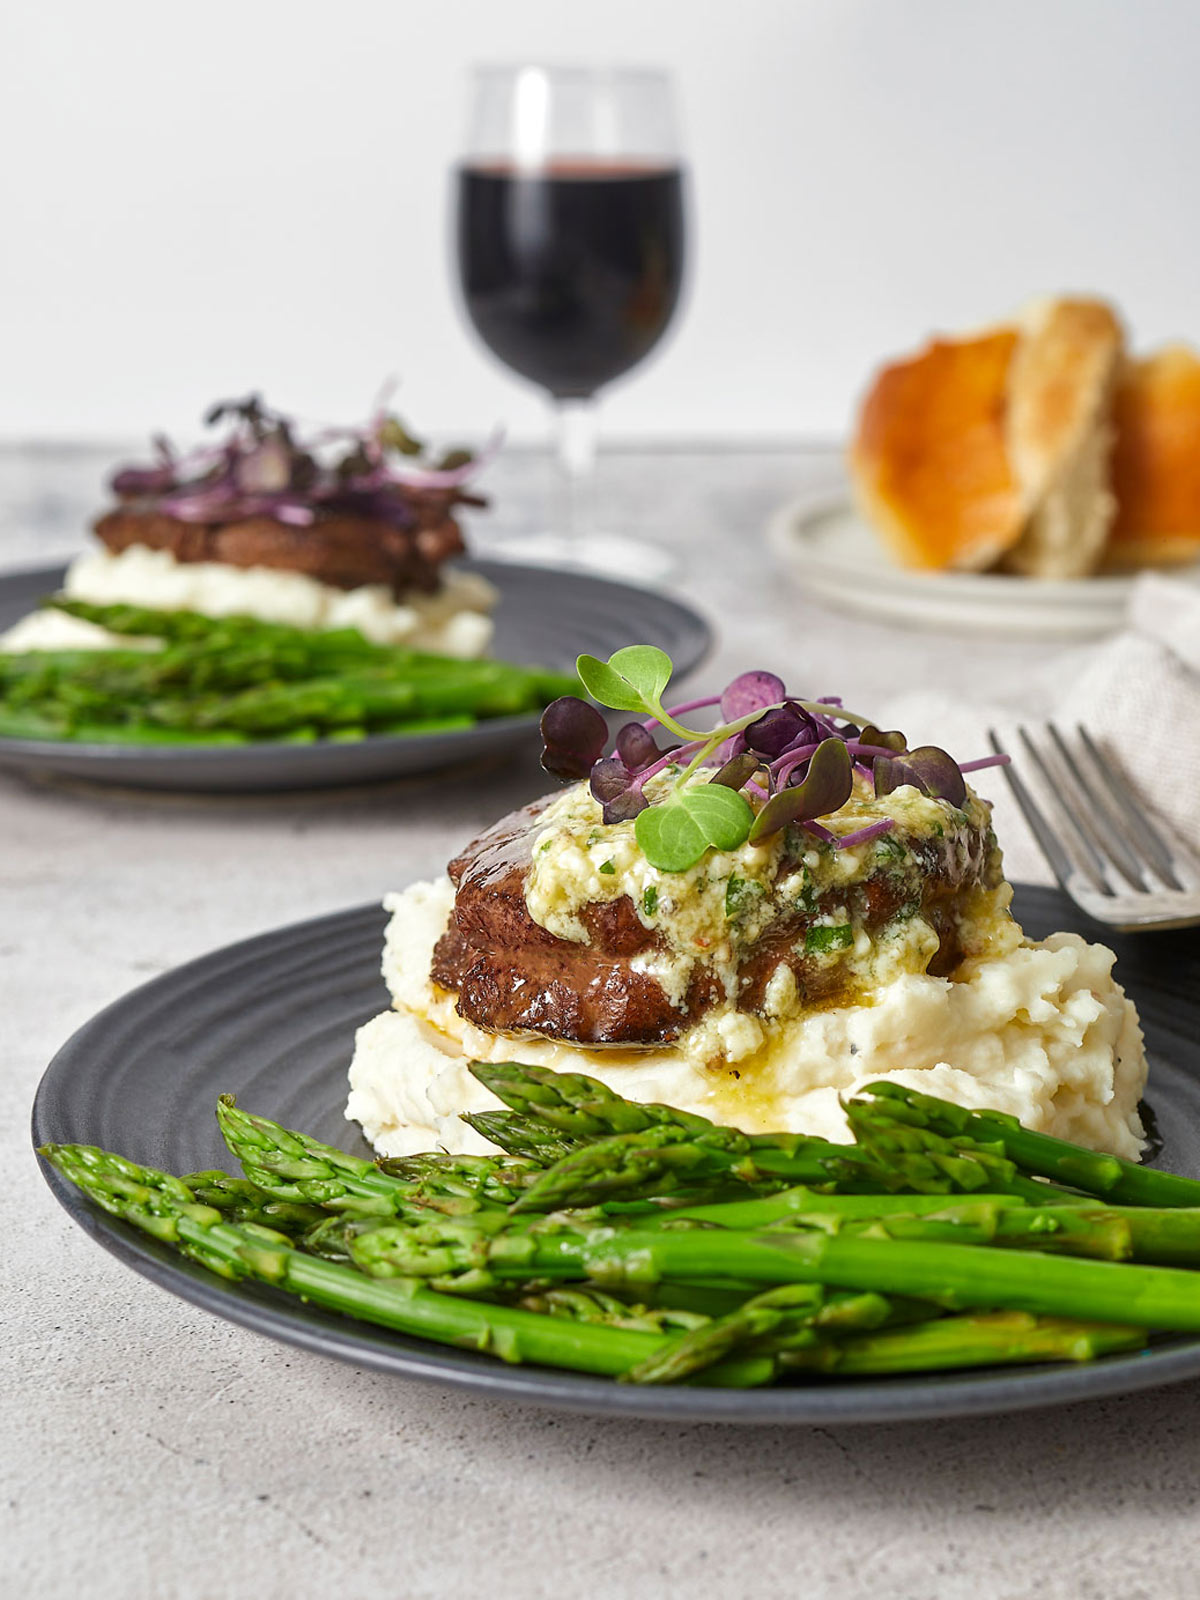 Plate with mashed potatoes, asparagus, and filet Mignon, topped with melting butter.